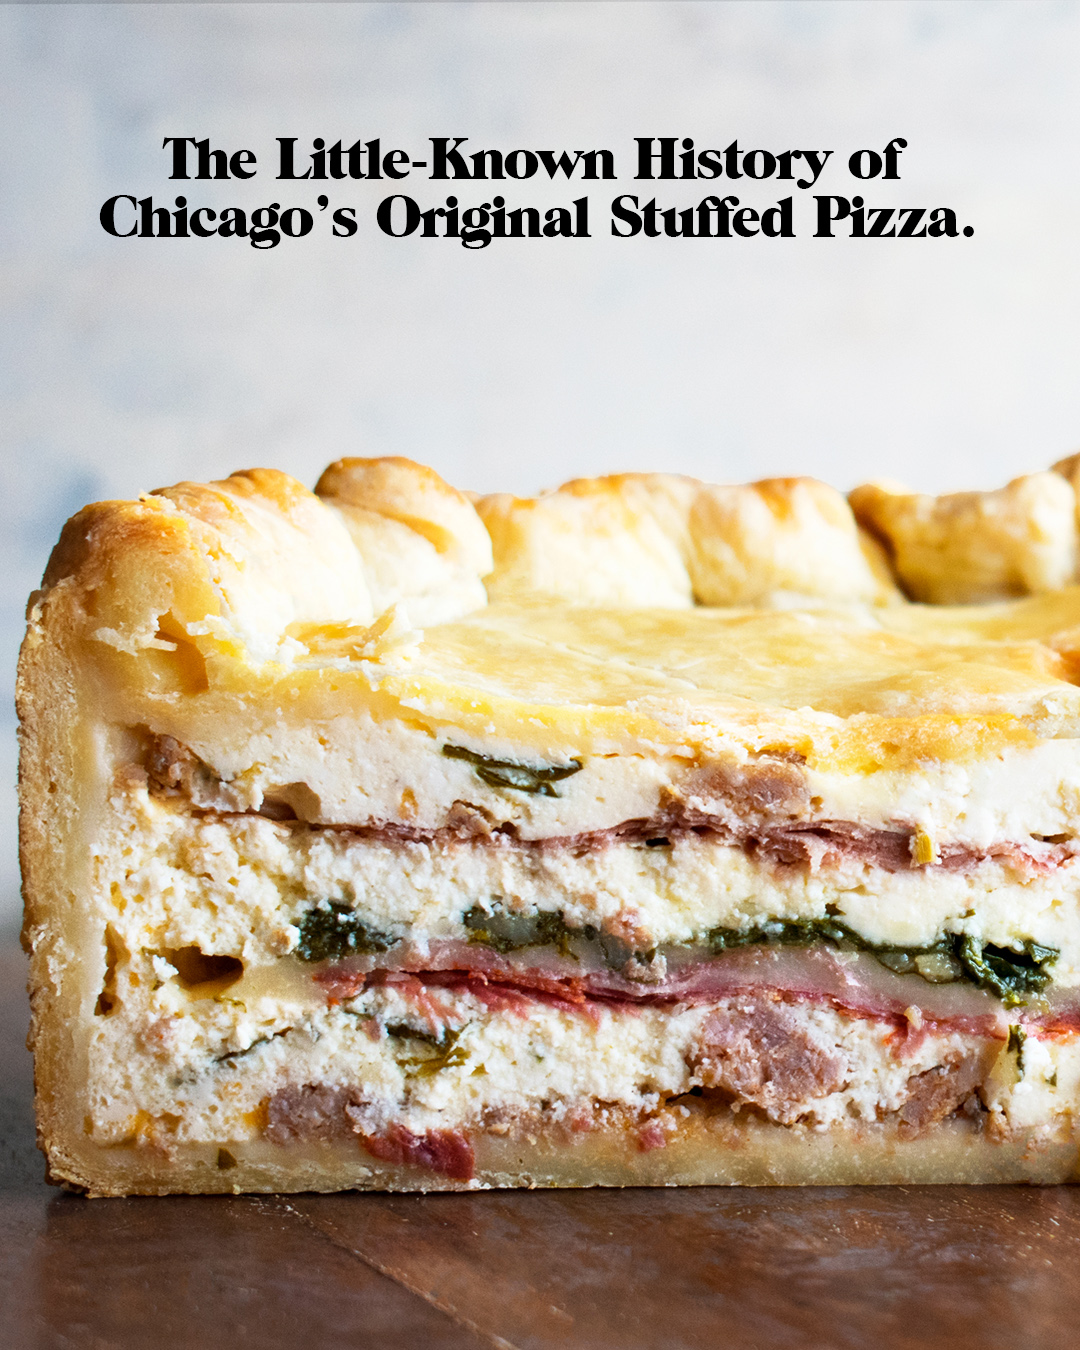 The Scarciedda - an Italian Easter Pie that inspired the Original Stuffed Pizza